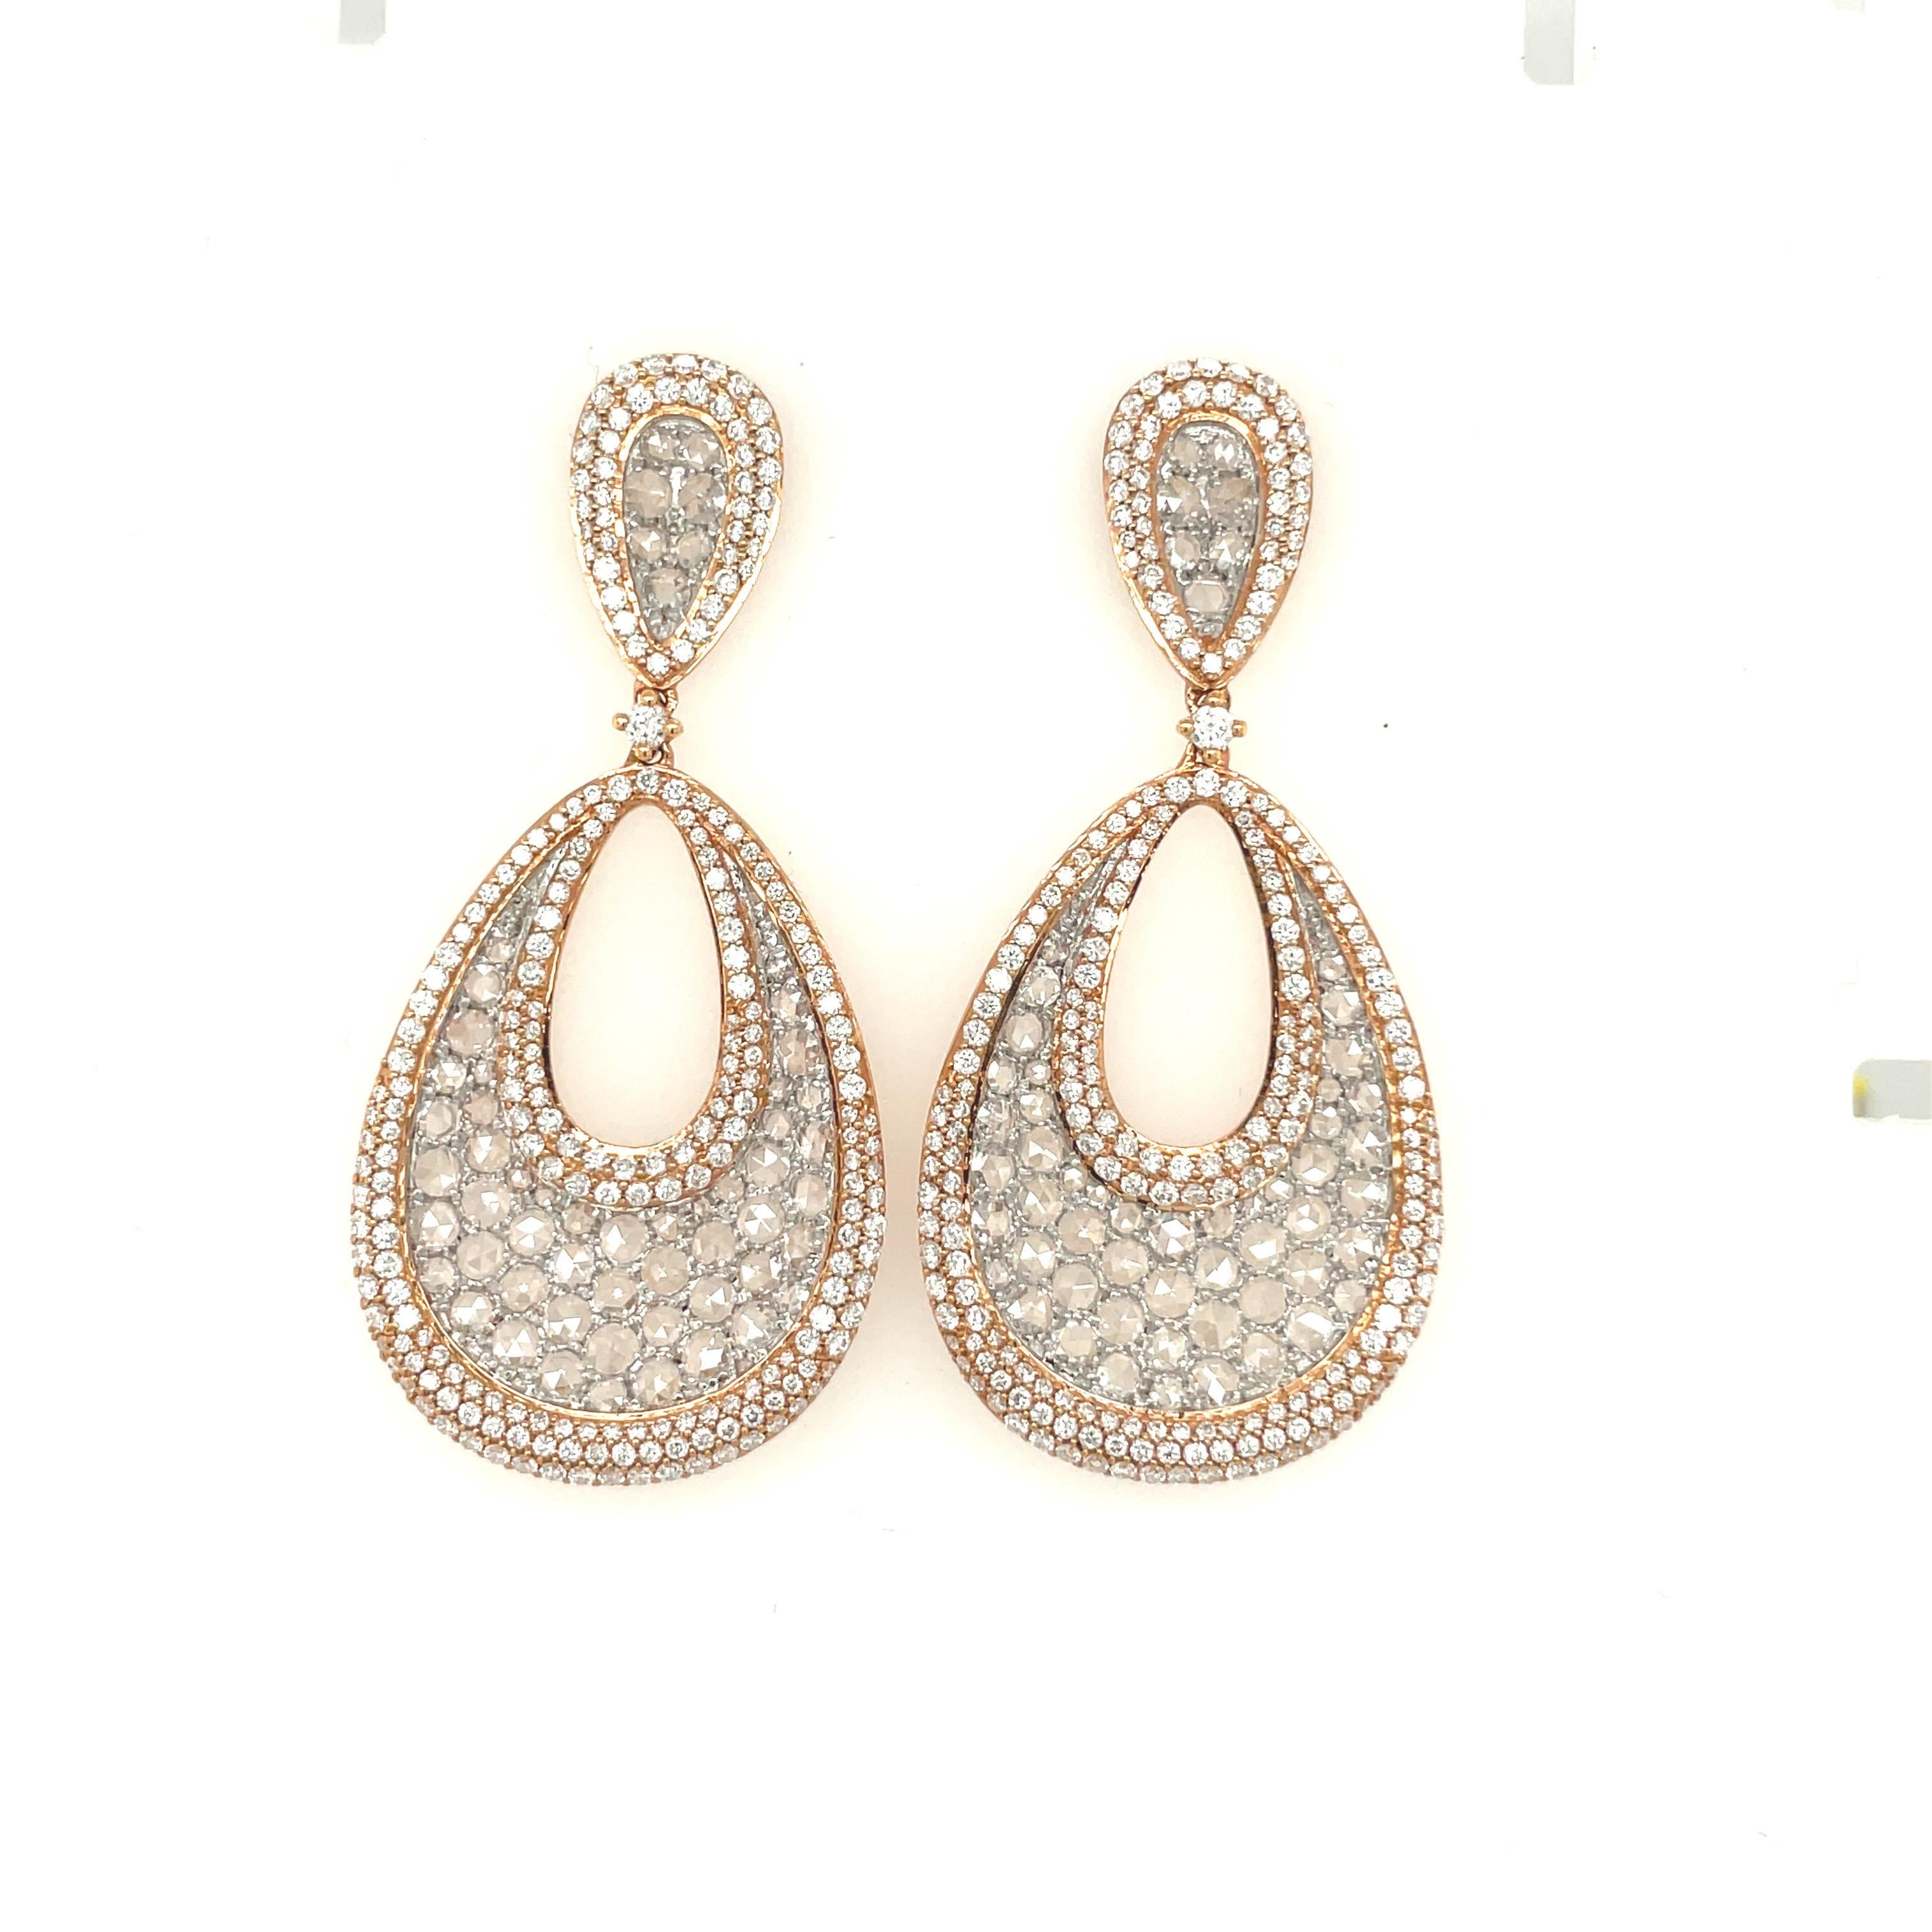 This stunning pair of hanging earrings are set with 2.70 carats of round diamonds surround 2.95 carats of rose-cut diamonds. The sparkle of the diamonds are enhanced by the combination of diamond cuts, as well as the combination of golds.

Set in